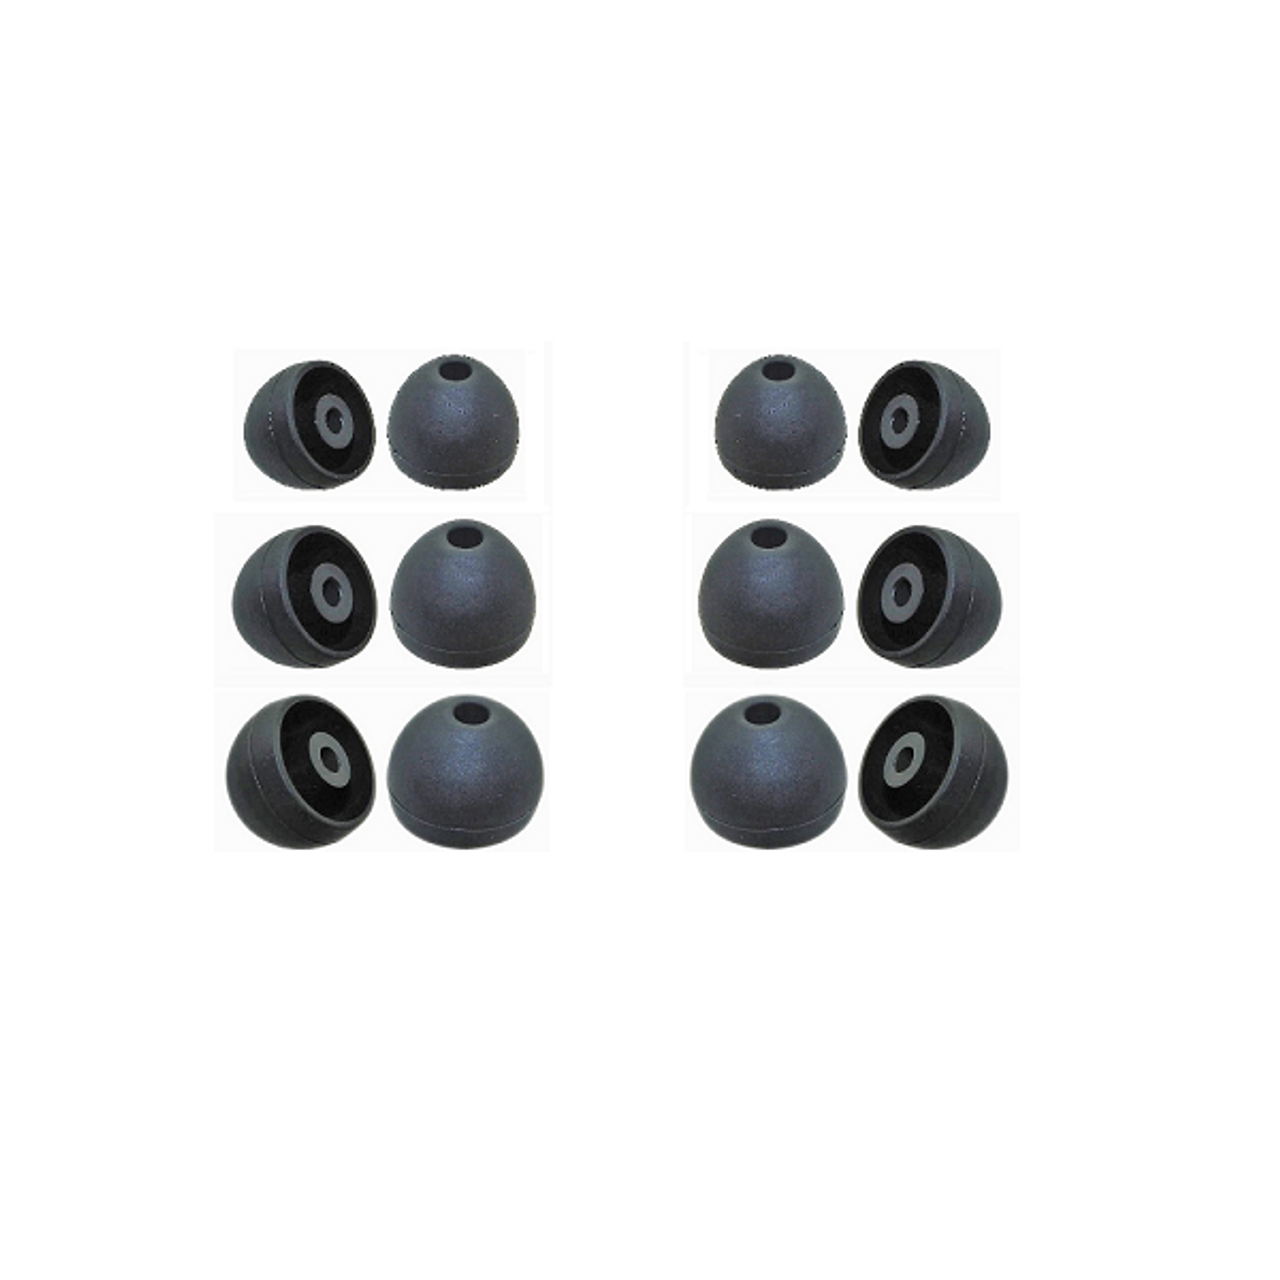 replacement earbud tips for Pyle